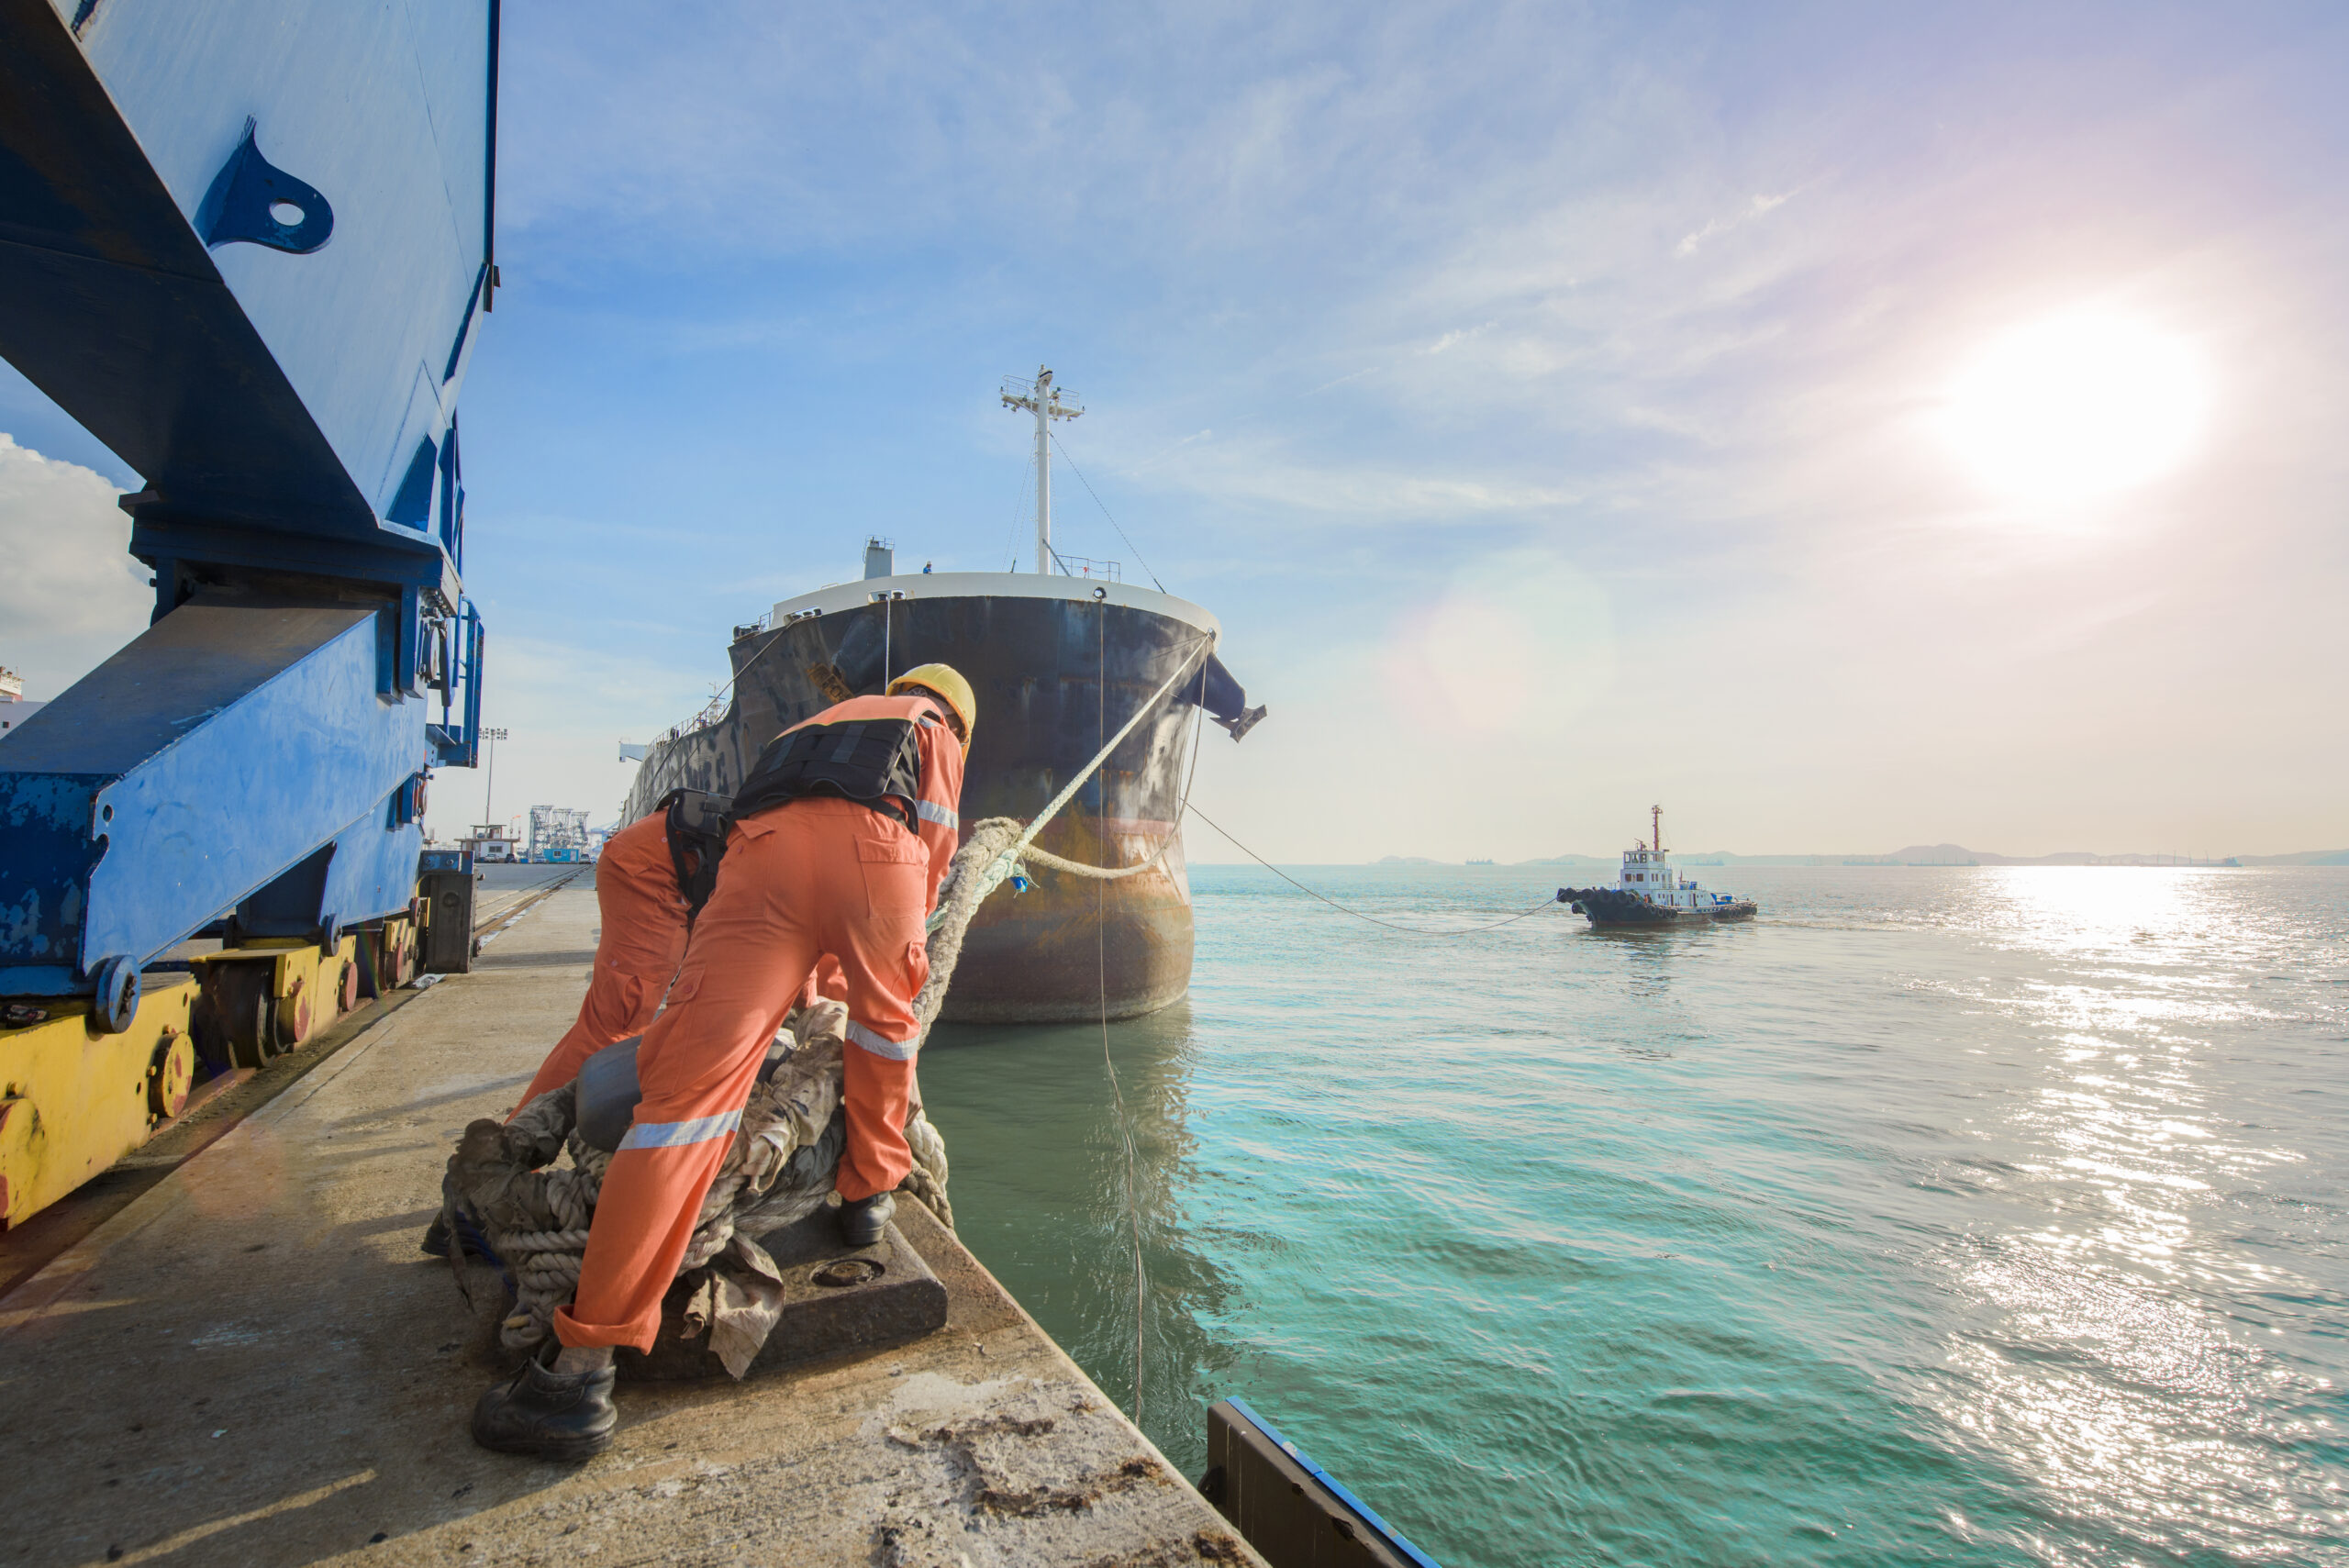 a pair of maritime workers mooring a ship to a dock